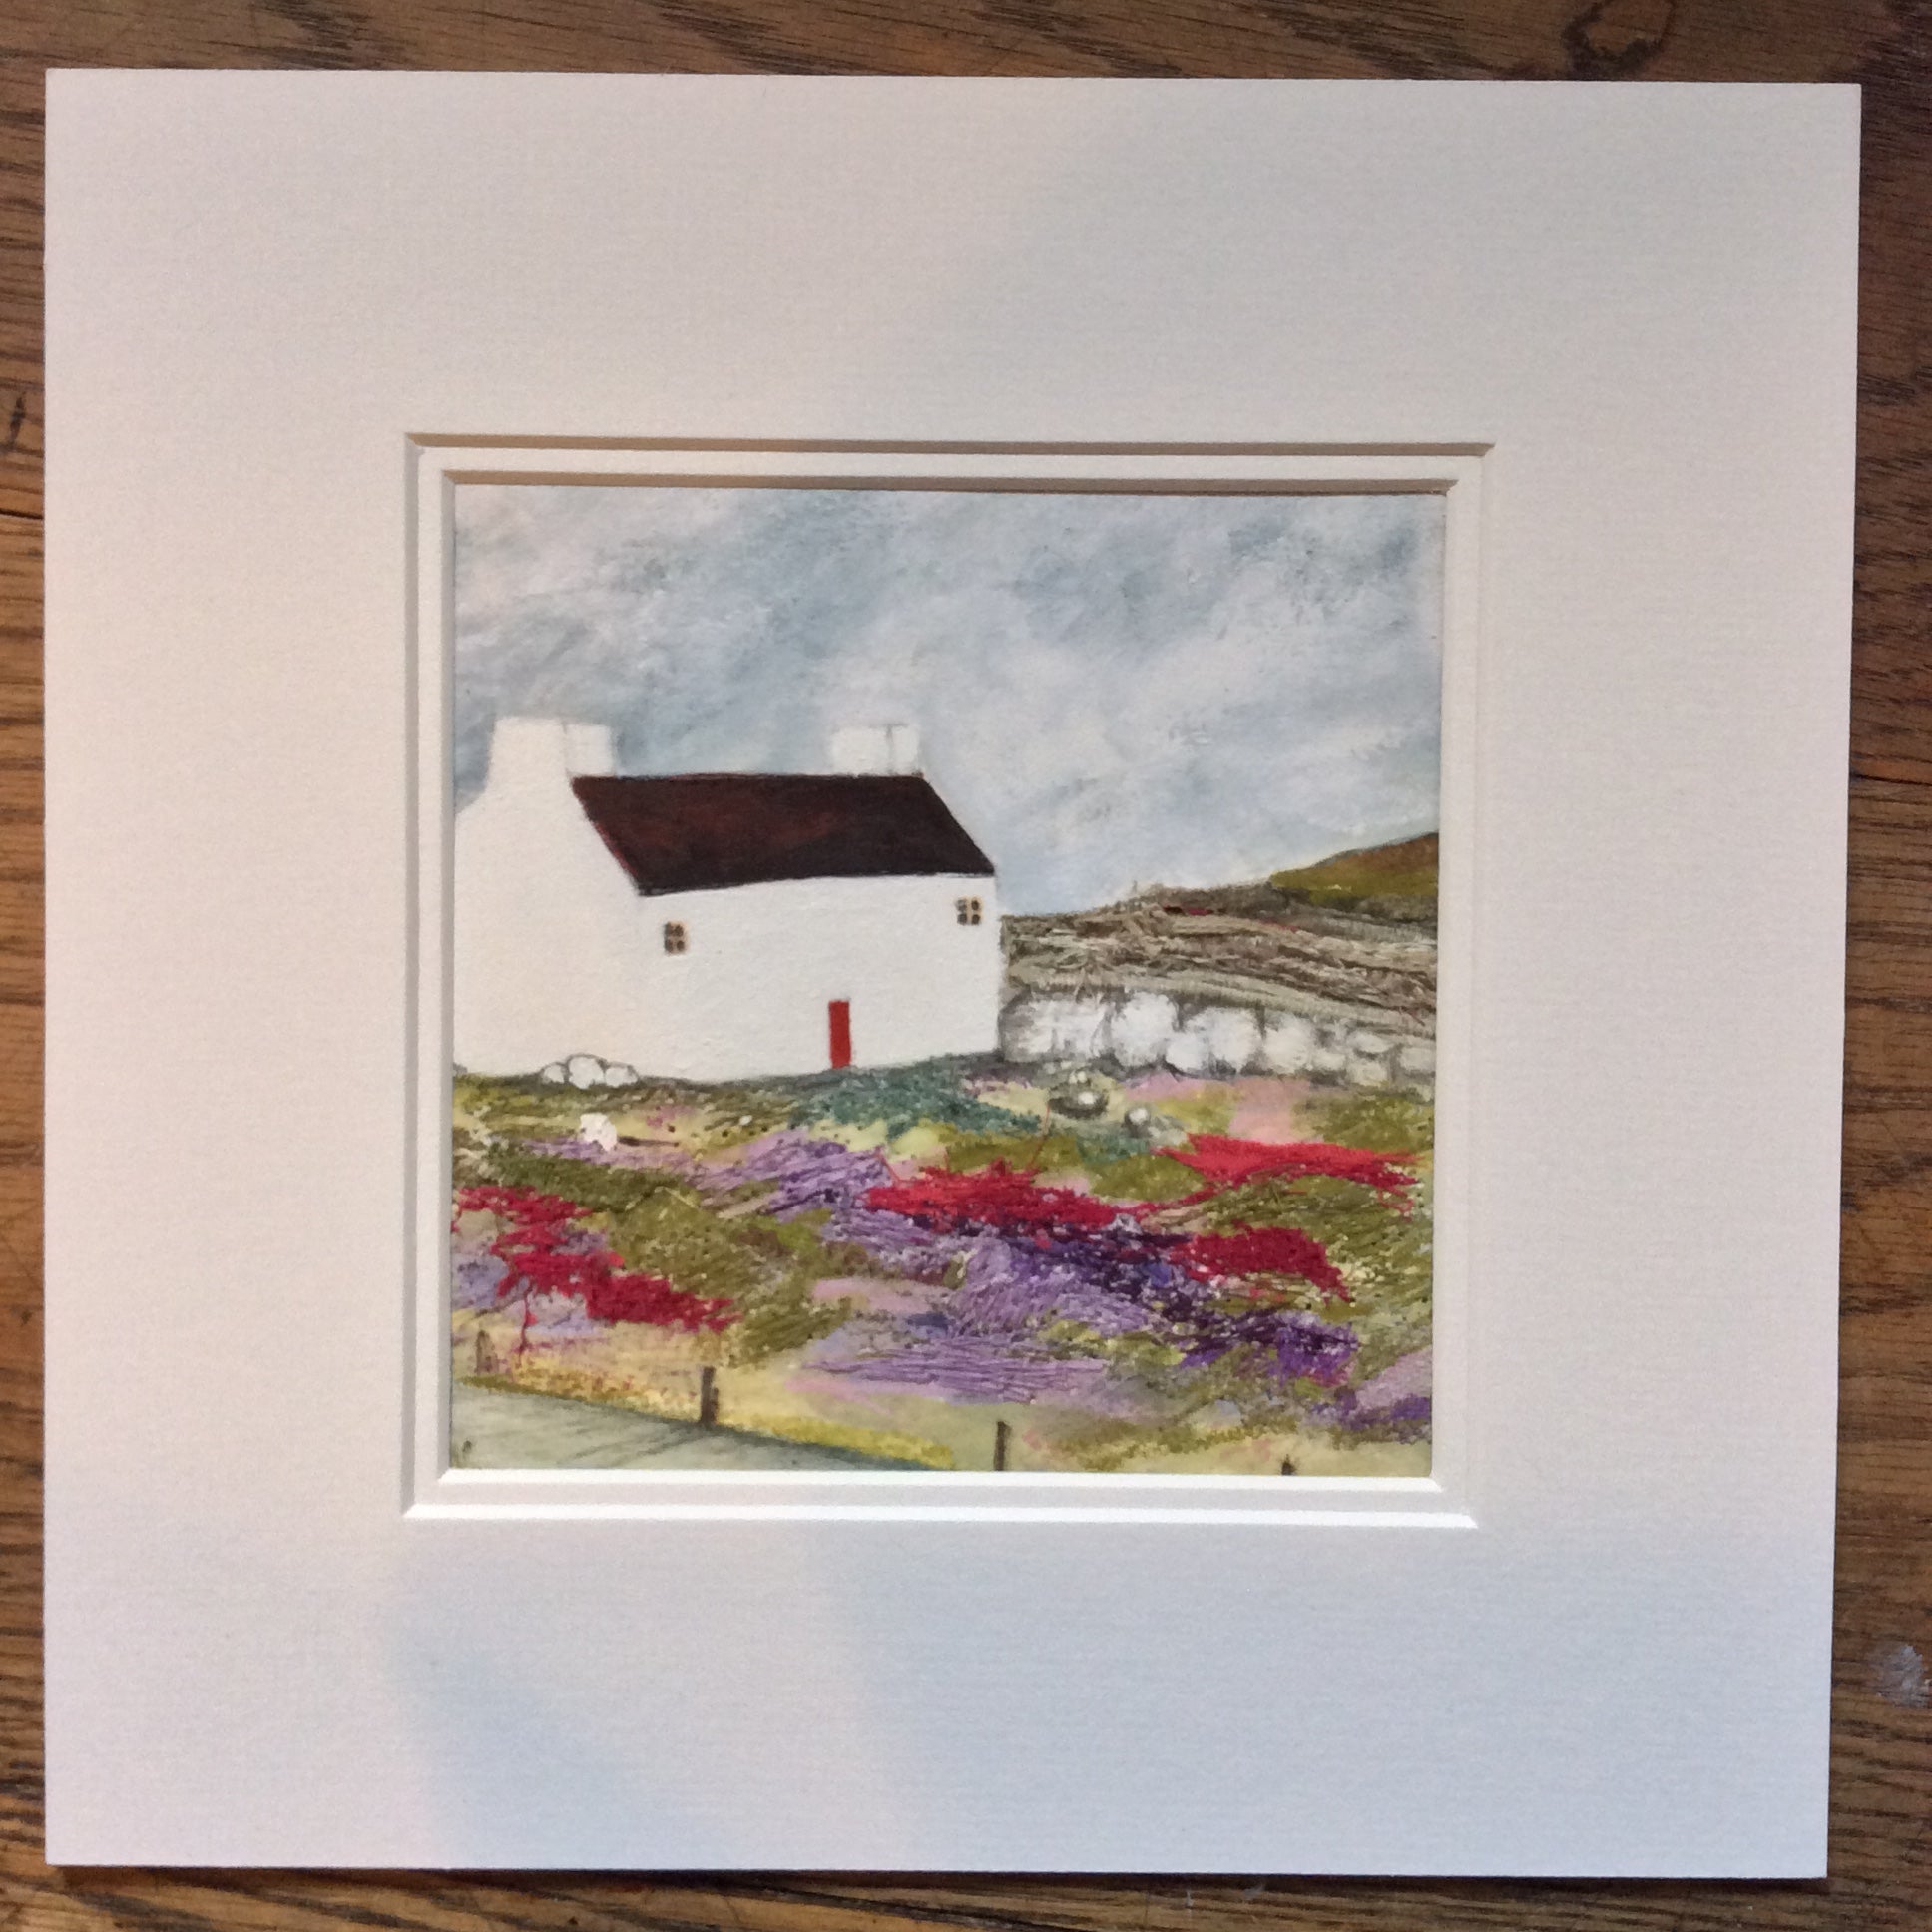 Mixed Media Art print work by Louise O'Hara "Plough cottage”